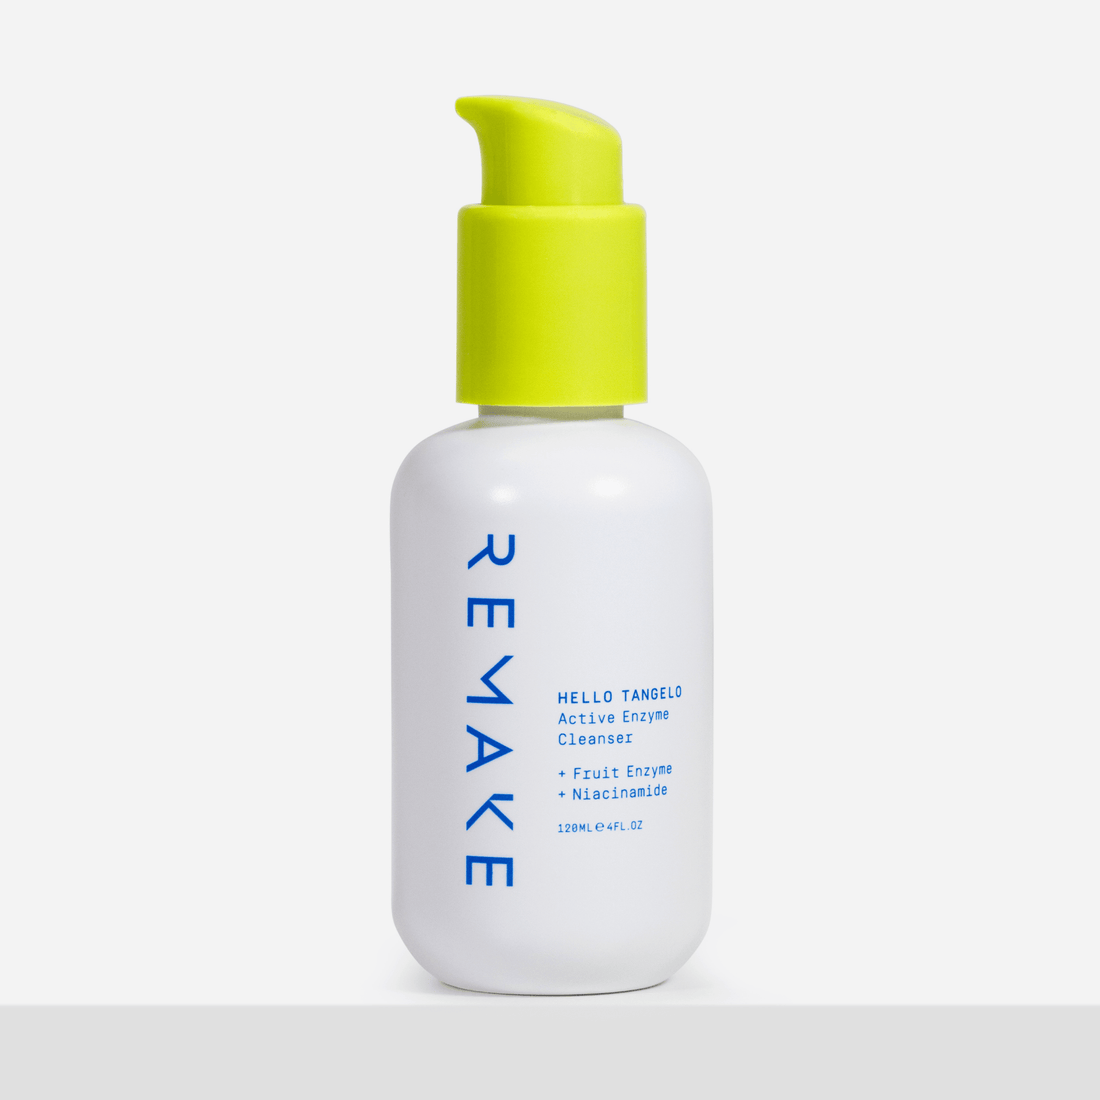 HELLO TANGELO: Active Enzyme Cleanser - REMAKE